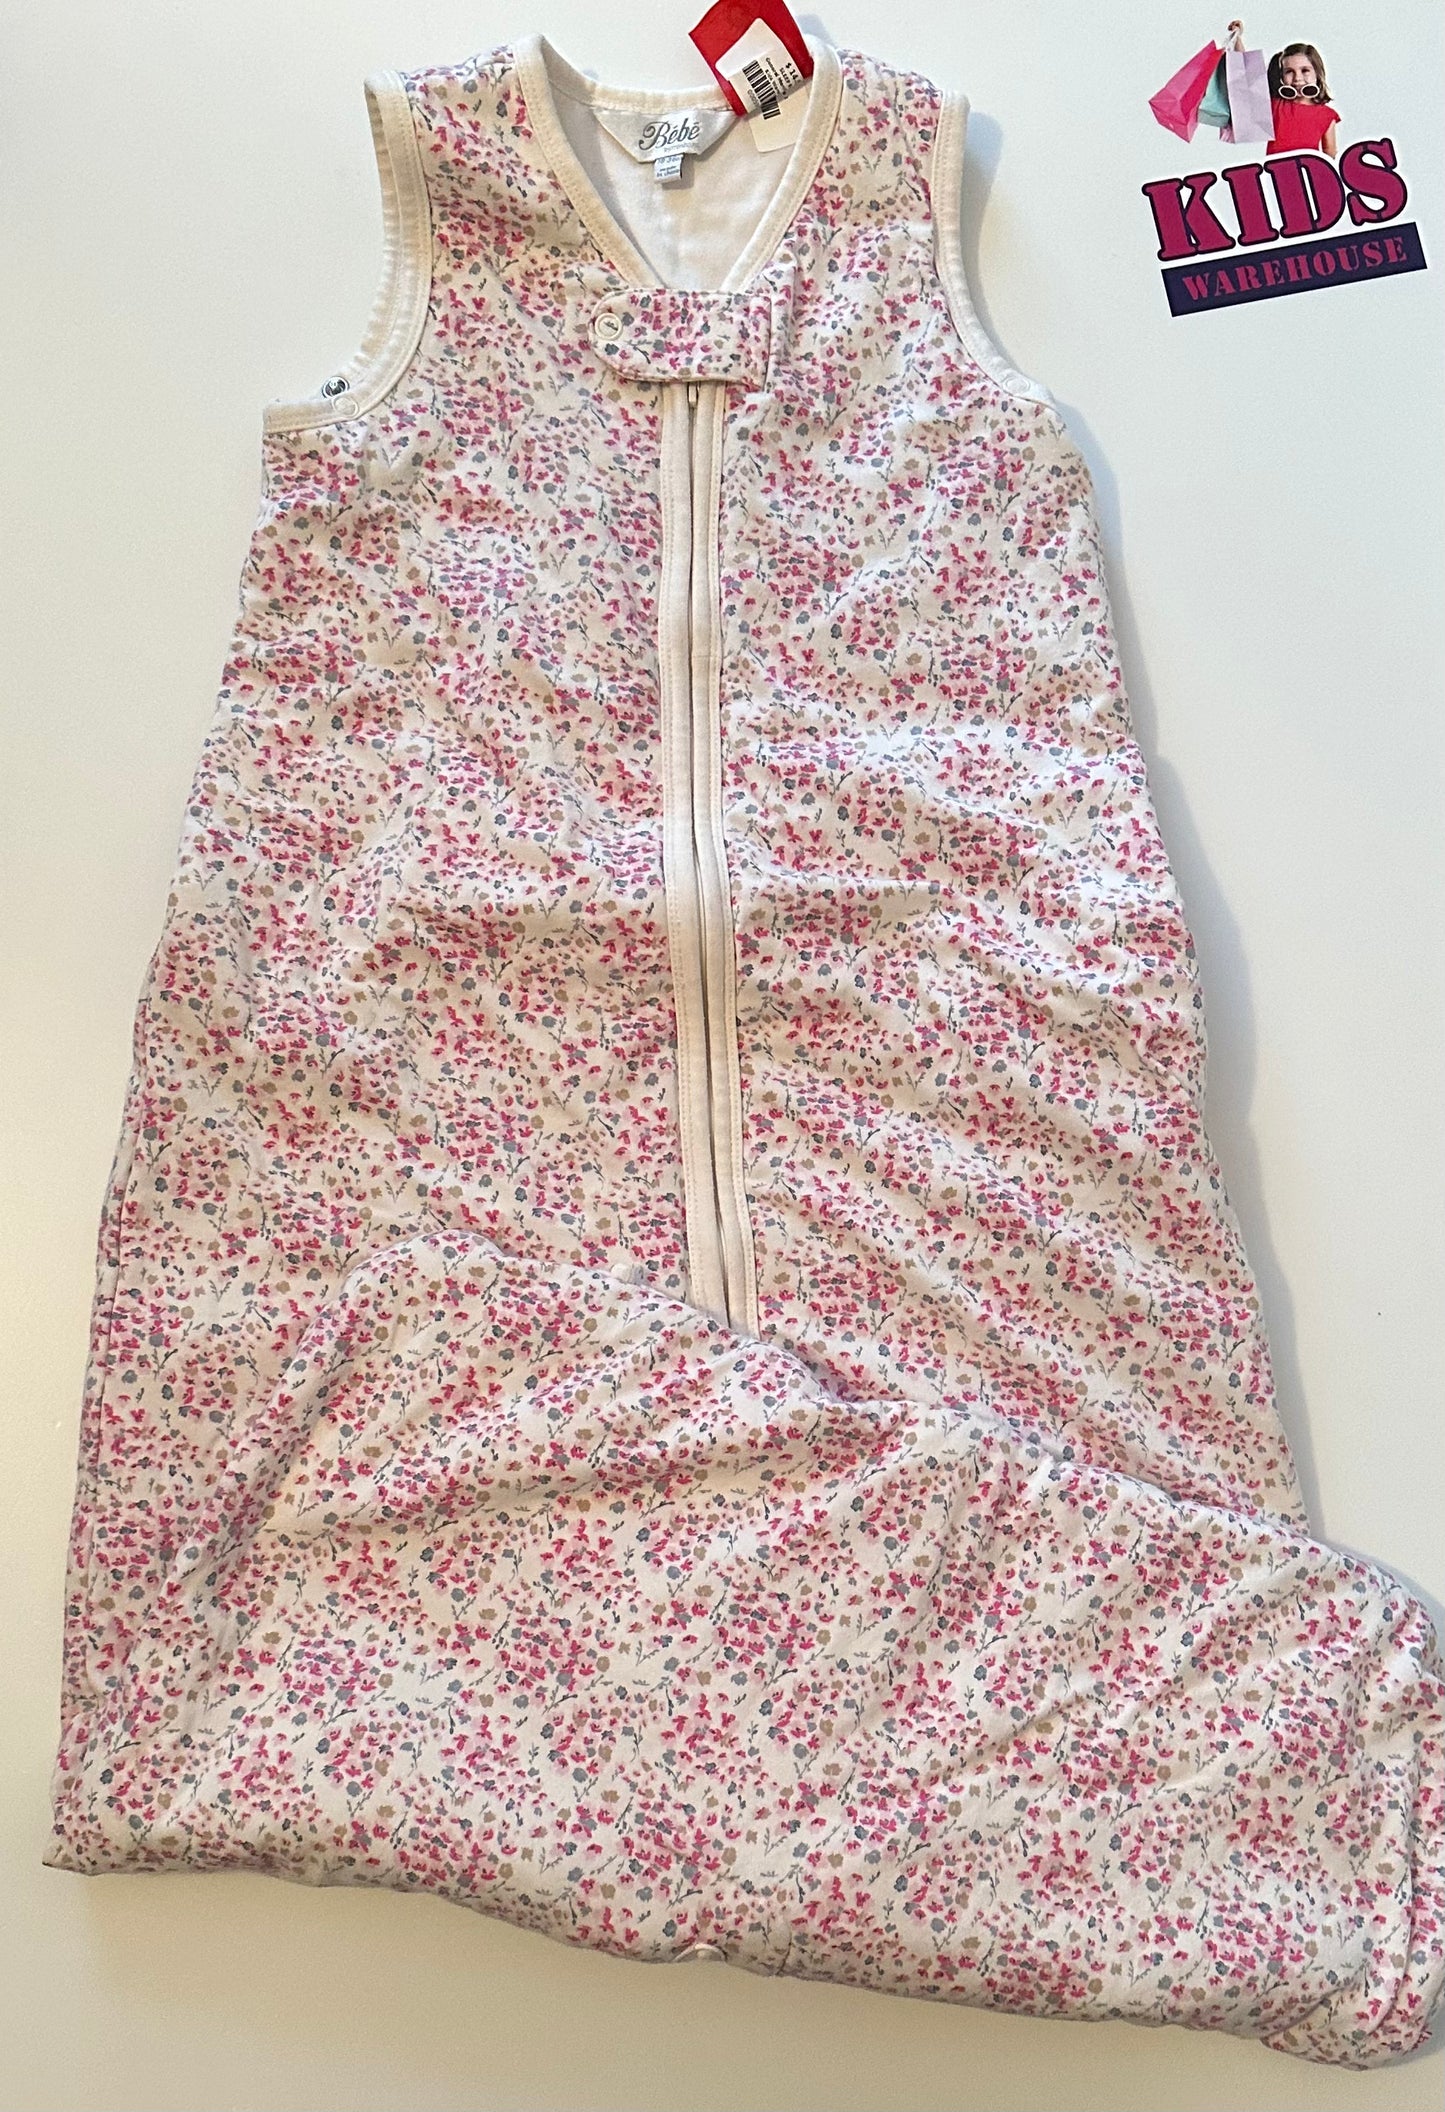 Bebe by Minihaha Floral Thick Growbag Size 18-36months